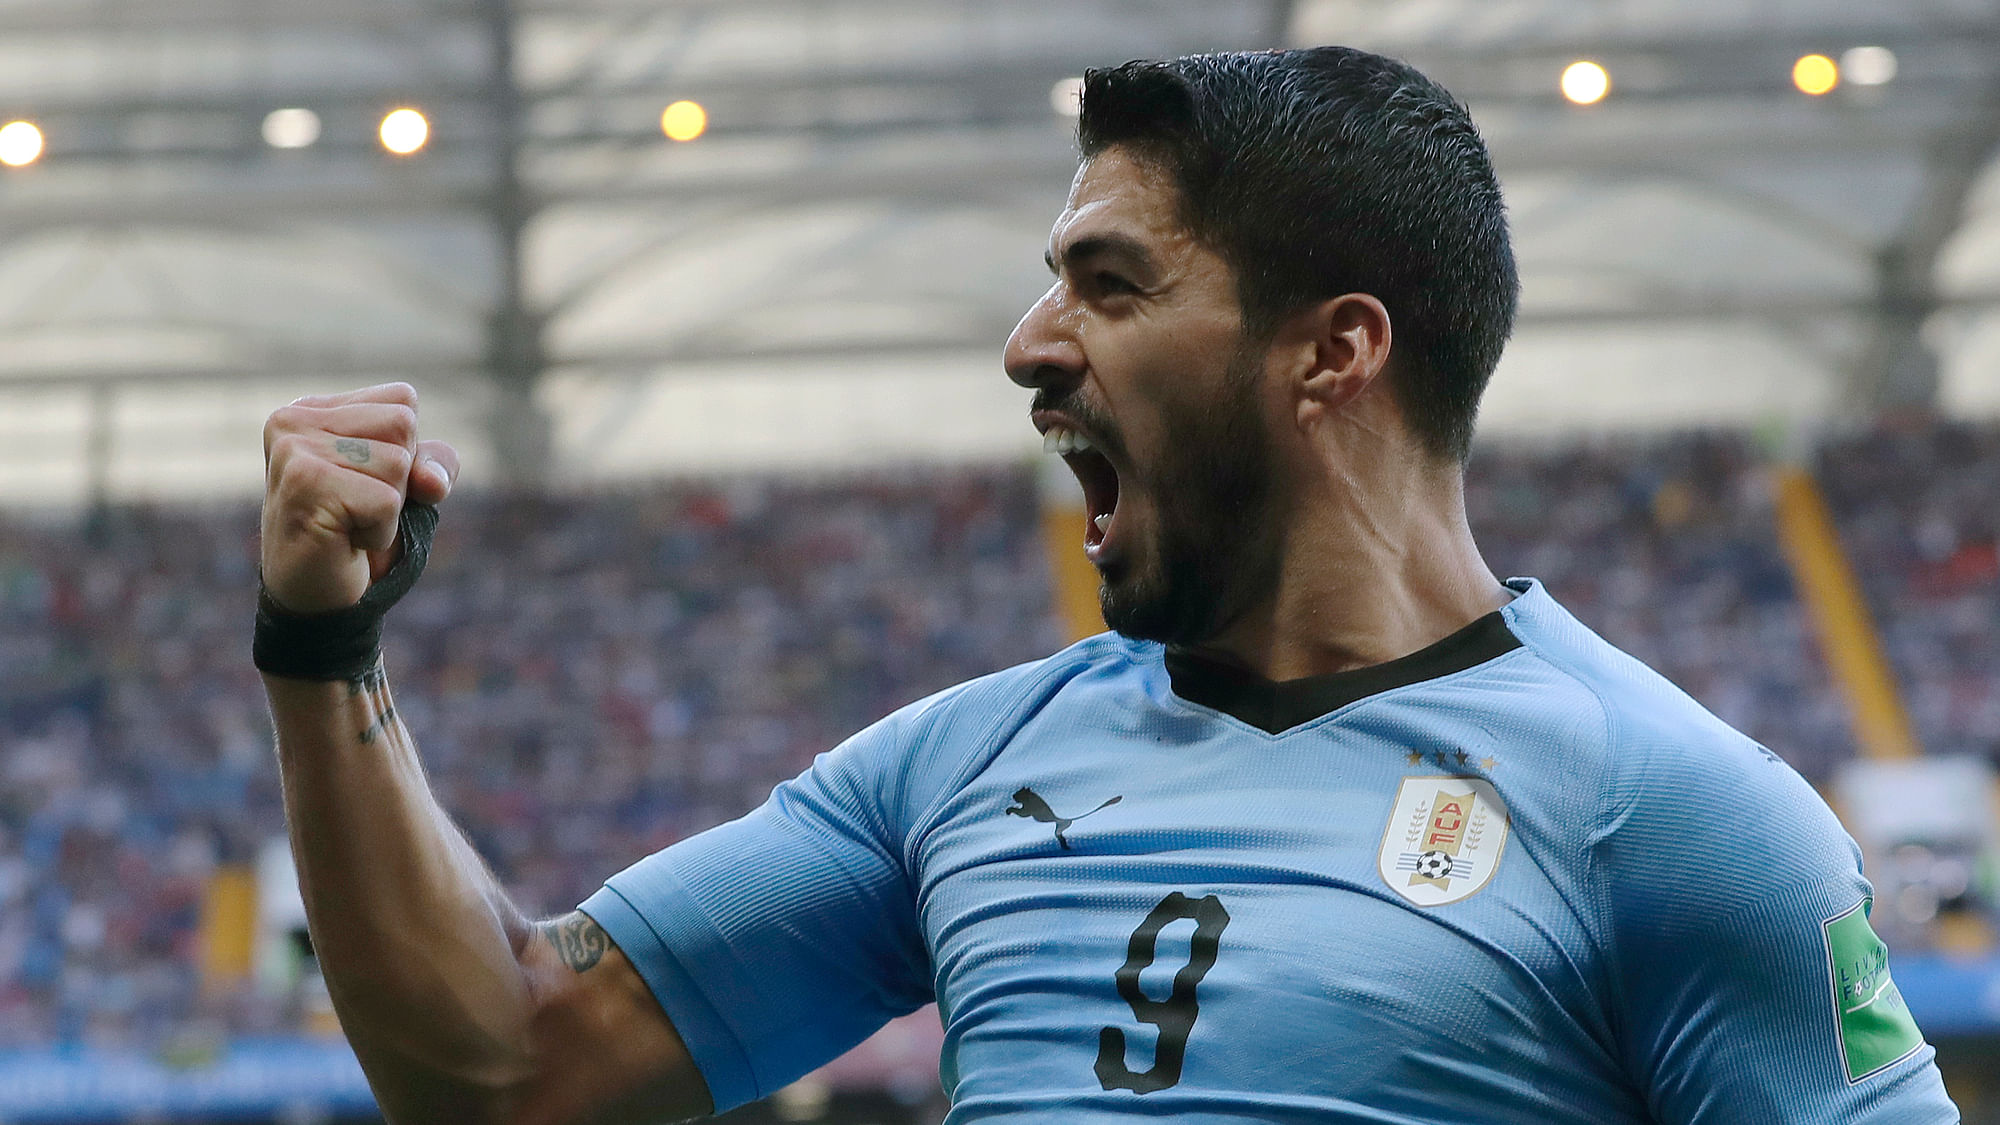 Uruguay’s Luis Suarez celebrates scoring his side’s first goal during the group A match against Saudi Arabia at the 2018 soccer World Cup in Rostov Arena in Rostov-on-Don, Russia, Wednesday, June 20, 2018.